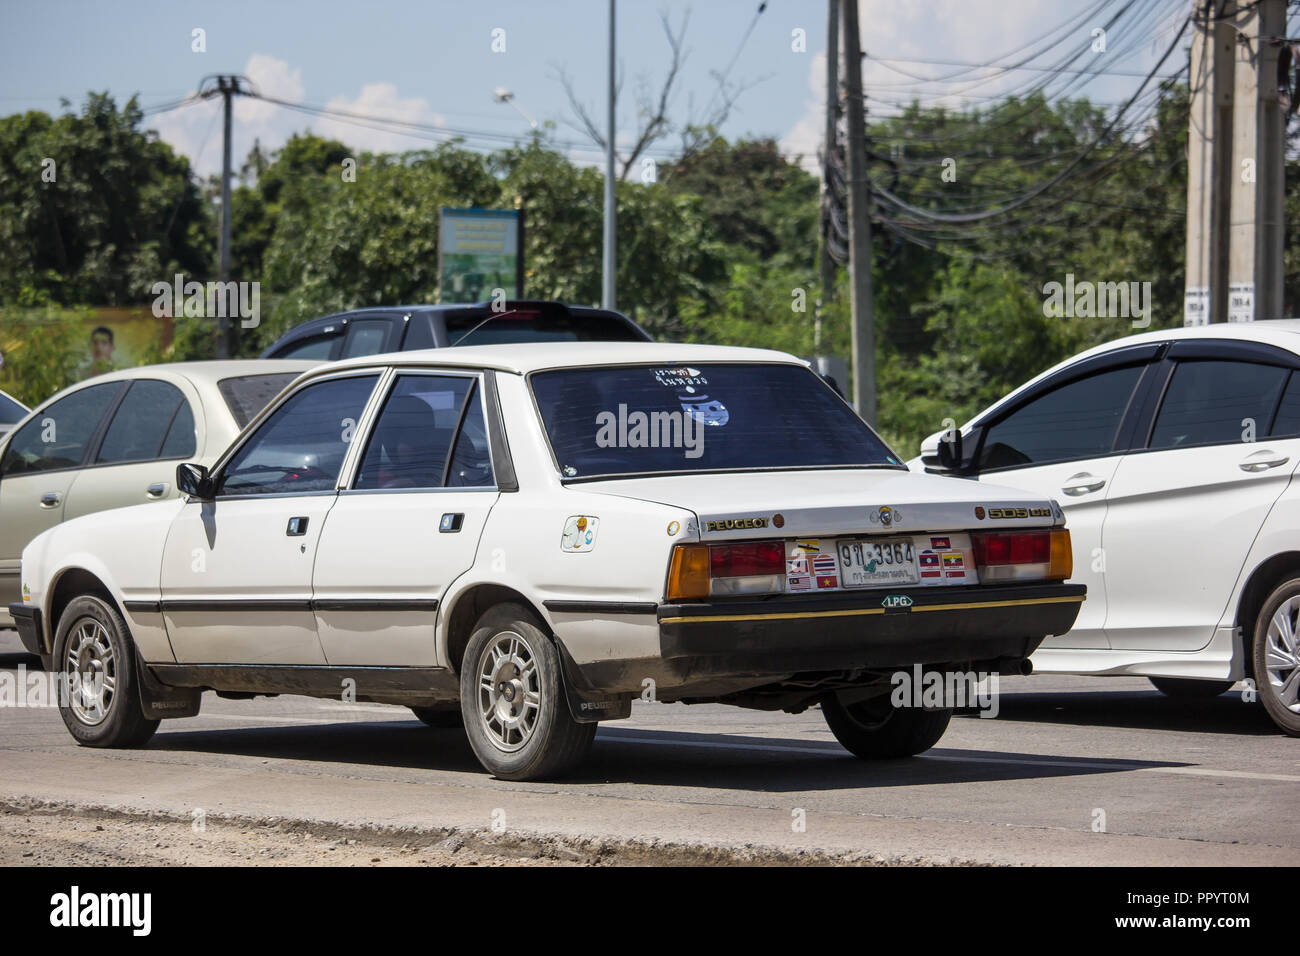 Chiangmai, Thailand - September 28 2018: Private Old Car, Peugeot 505 GR. Photo at road no.121 about 8 km from downtown Chiangmai, thailand. Stock Photo